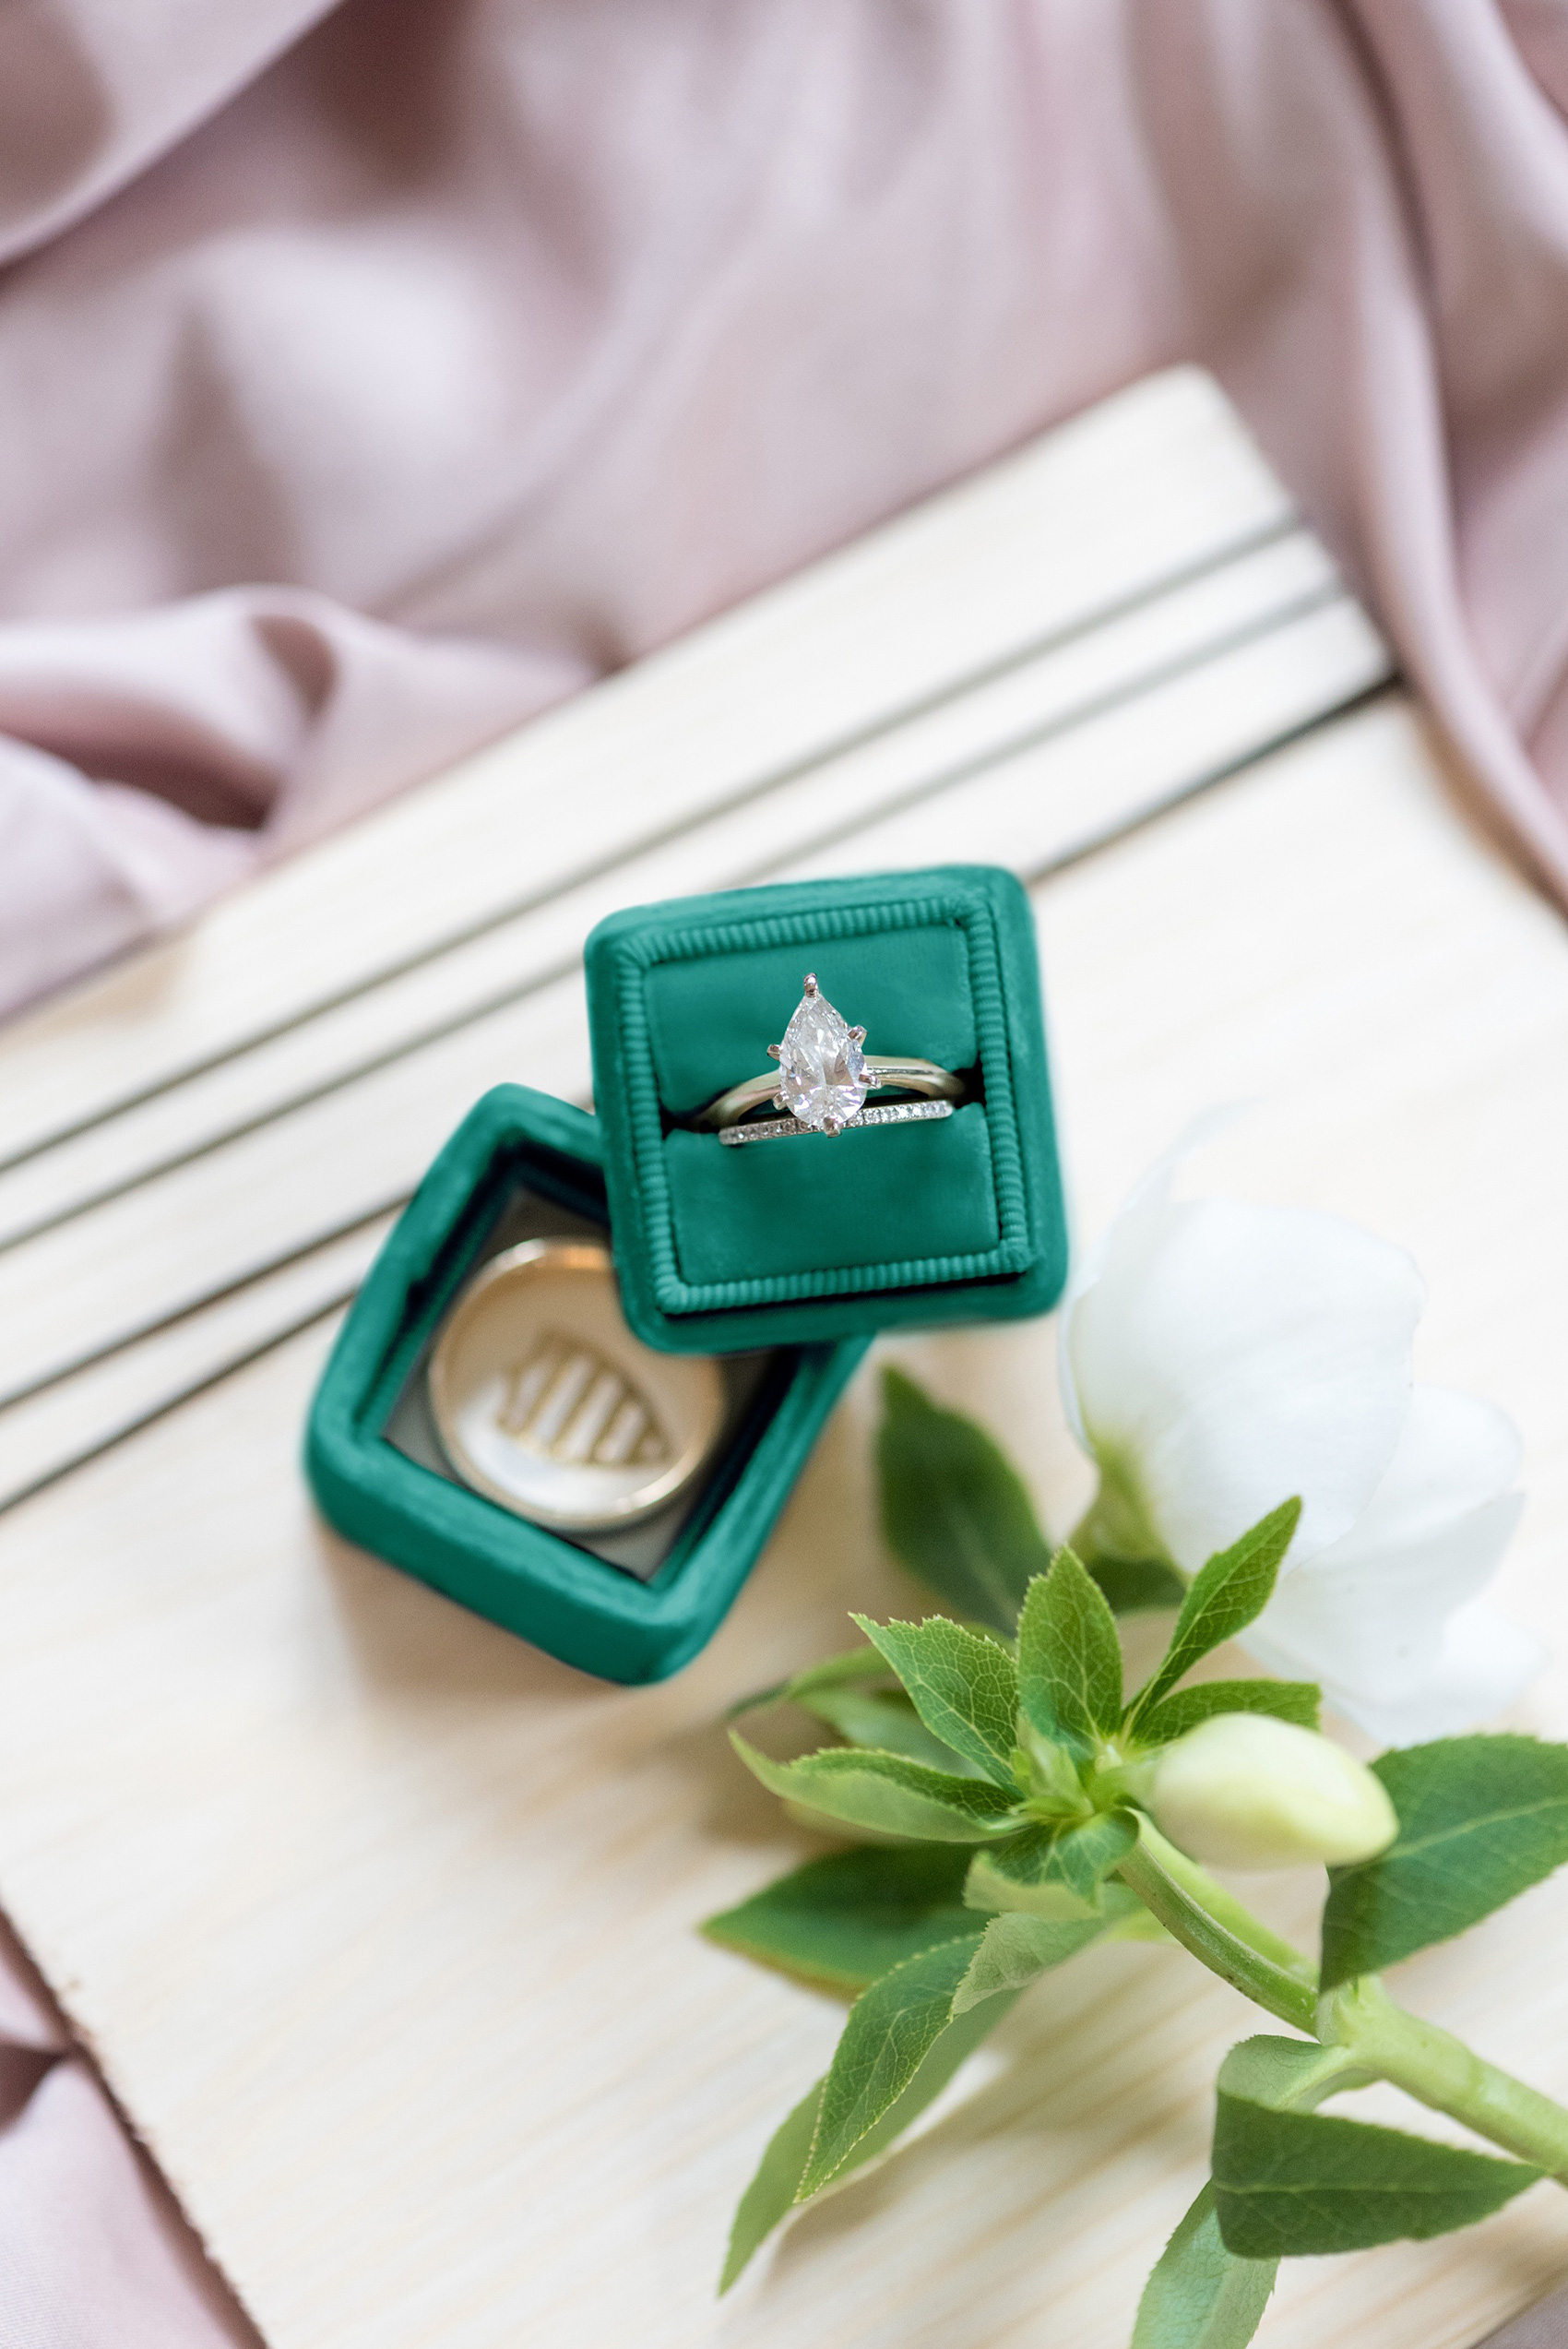 The Bradford NC Photos captured by Mikkel Paige Photography. This North Carolina Raleigh event venue has beautiful gardens and is perfect for outdoor or indoor ceremonies and receptions. Design by @vivalevent with a green, black and peach palette. Velvet engagement ring box from The Mrs. Box. #mikkelpaige #Raleighweddingphotographer #raleighweddingvenues